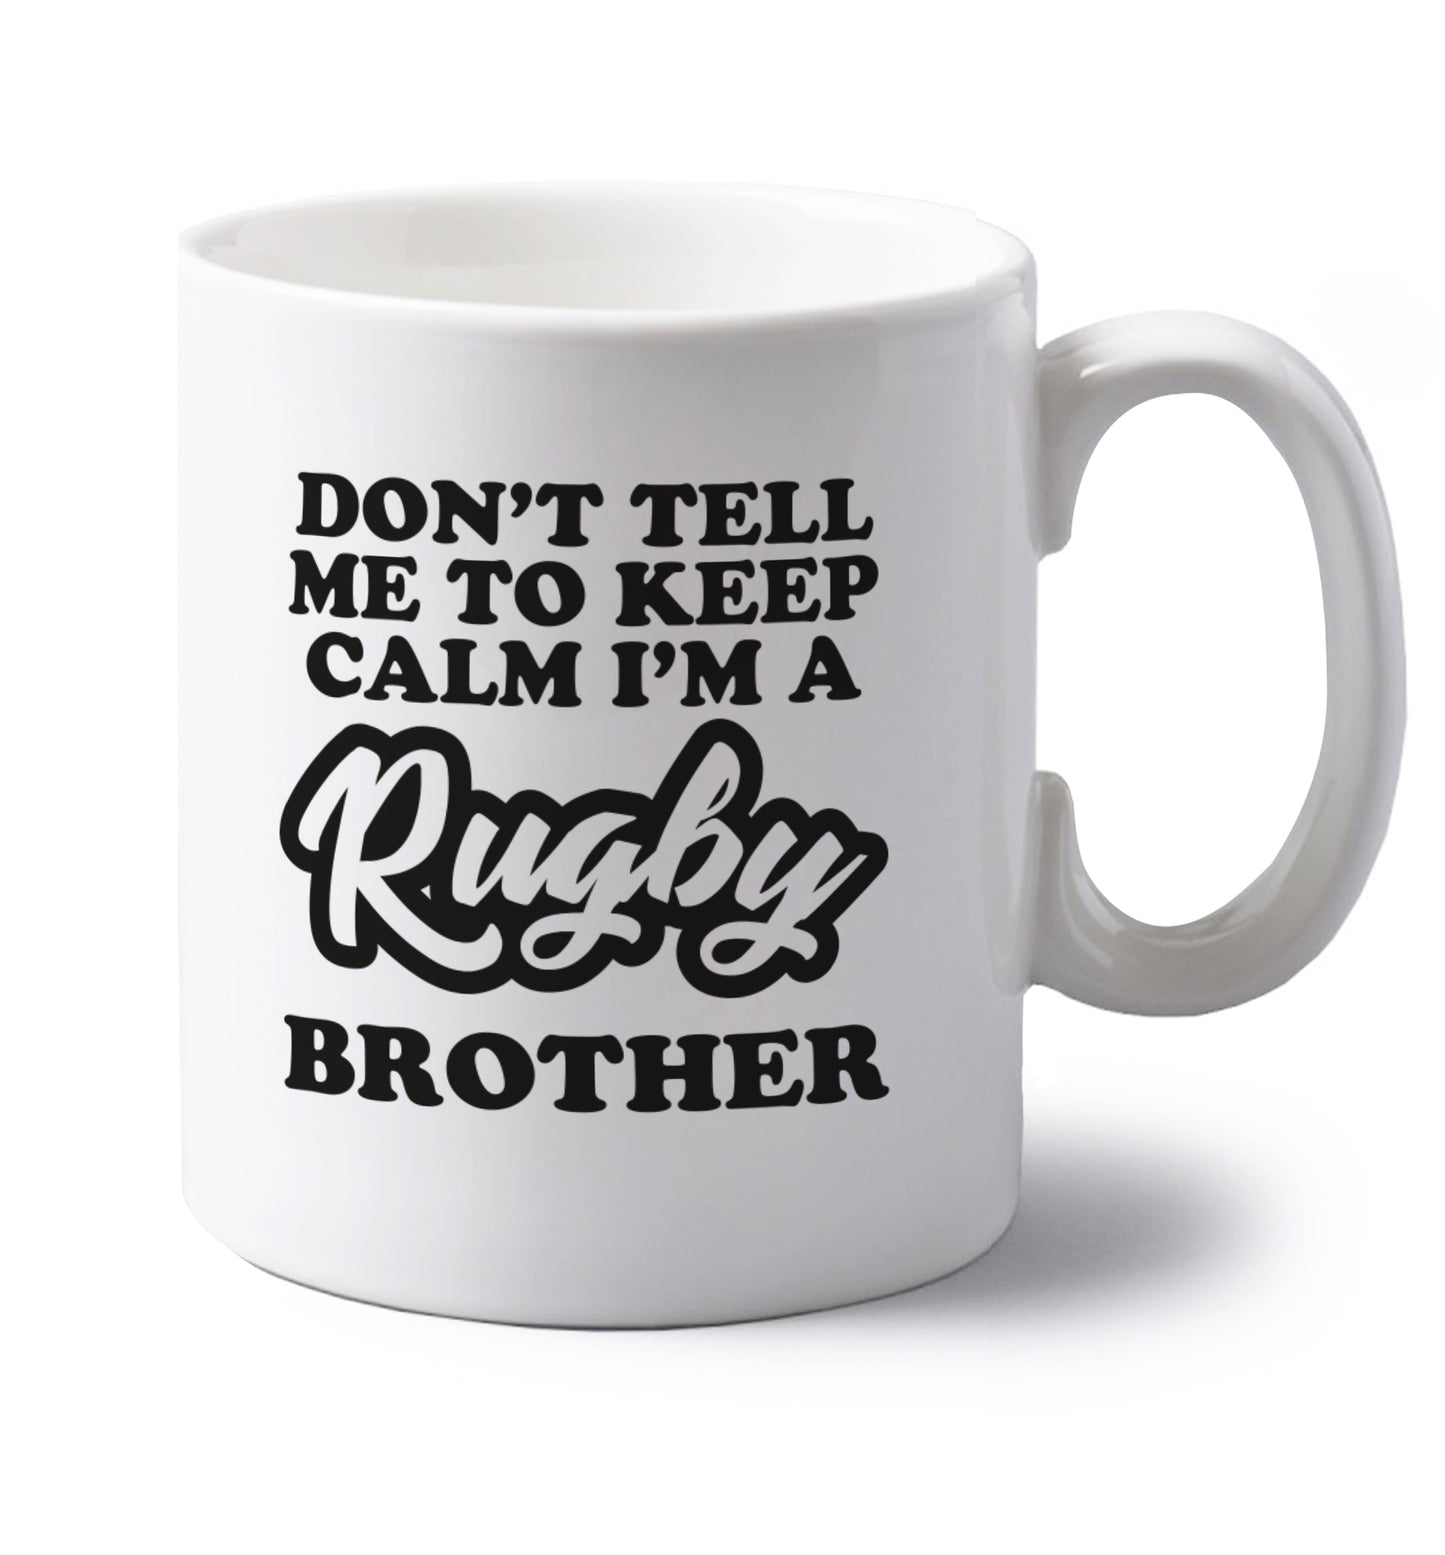 Don't tell me keep calm I'm a rugby brother left handed white ceramic mug 